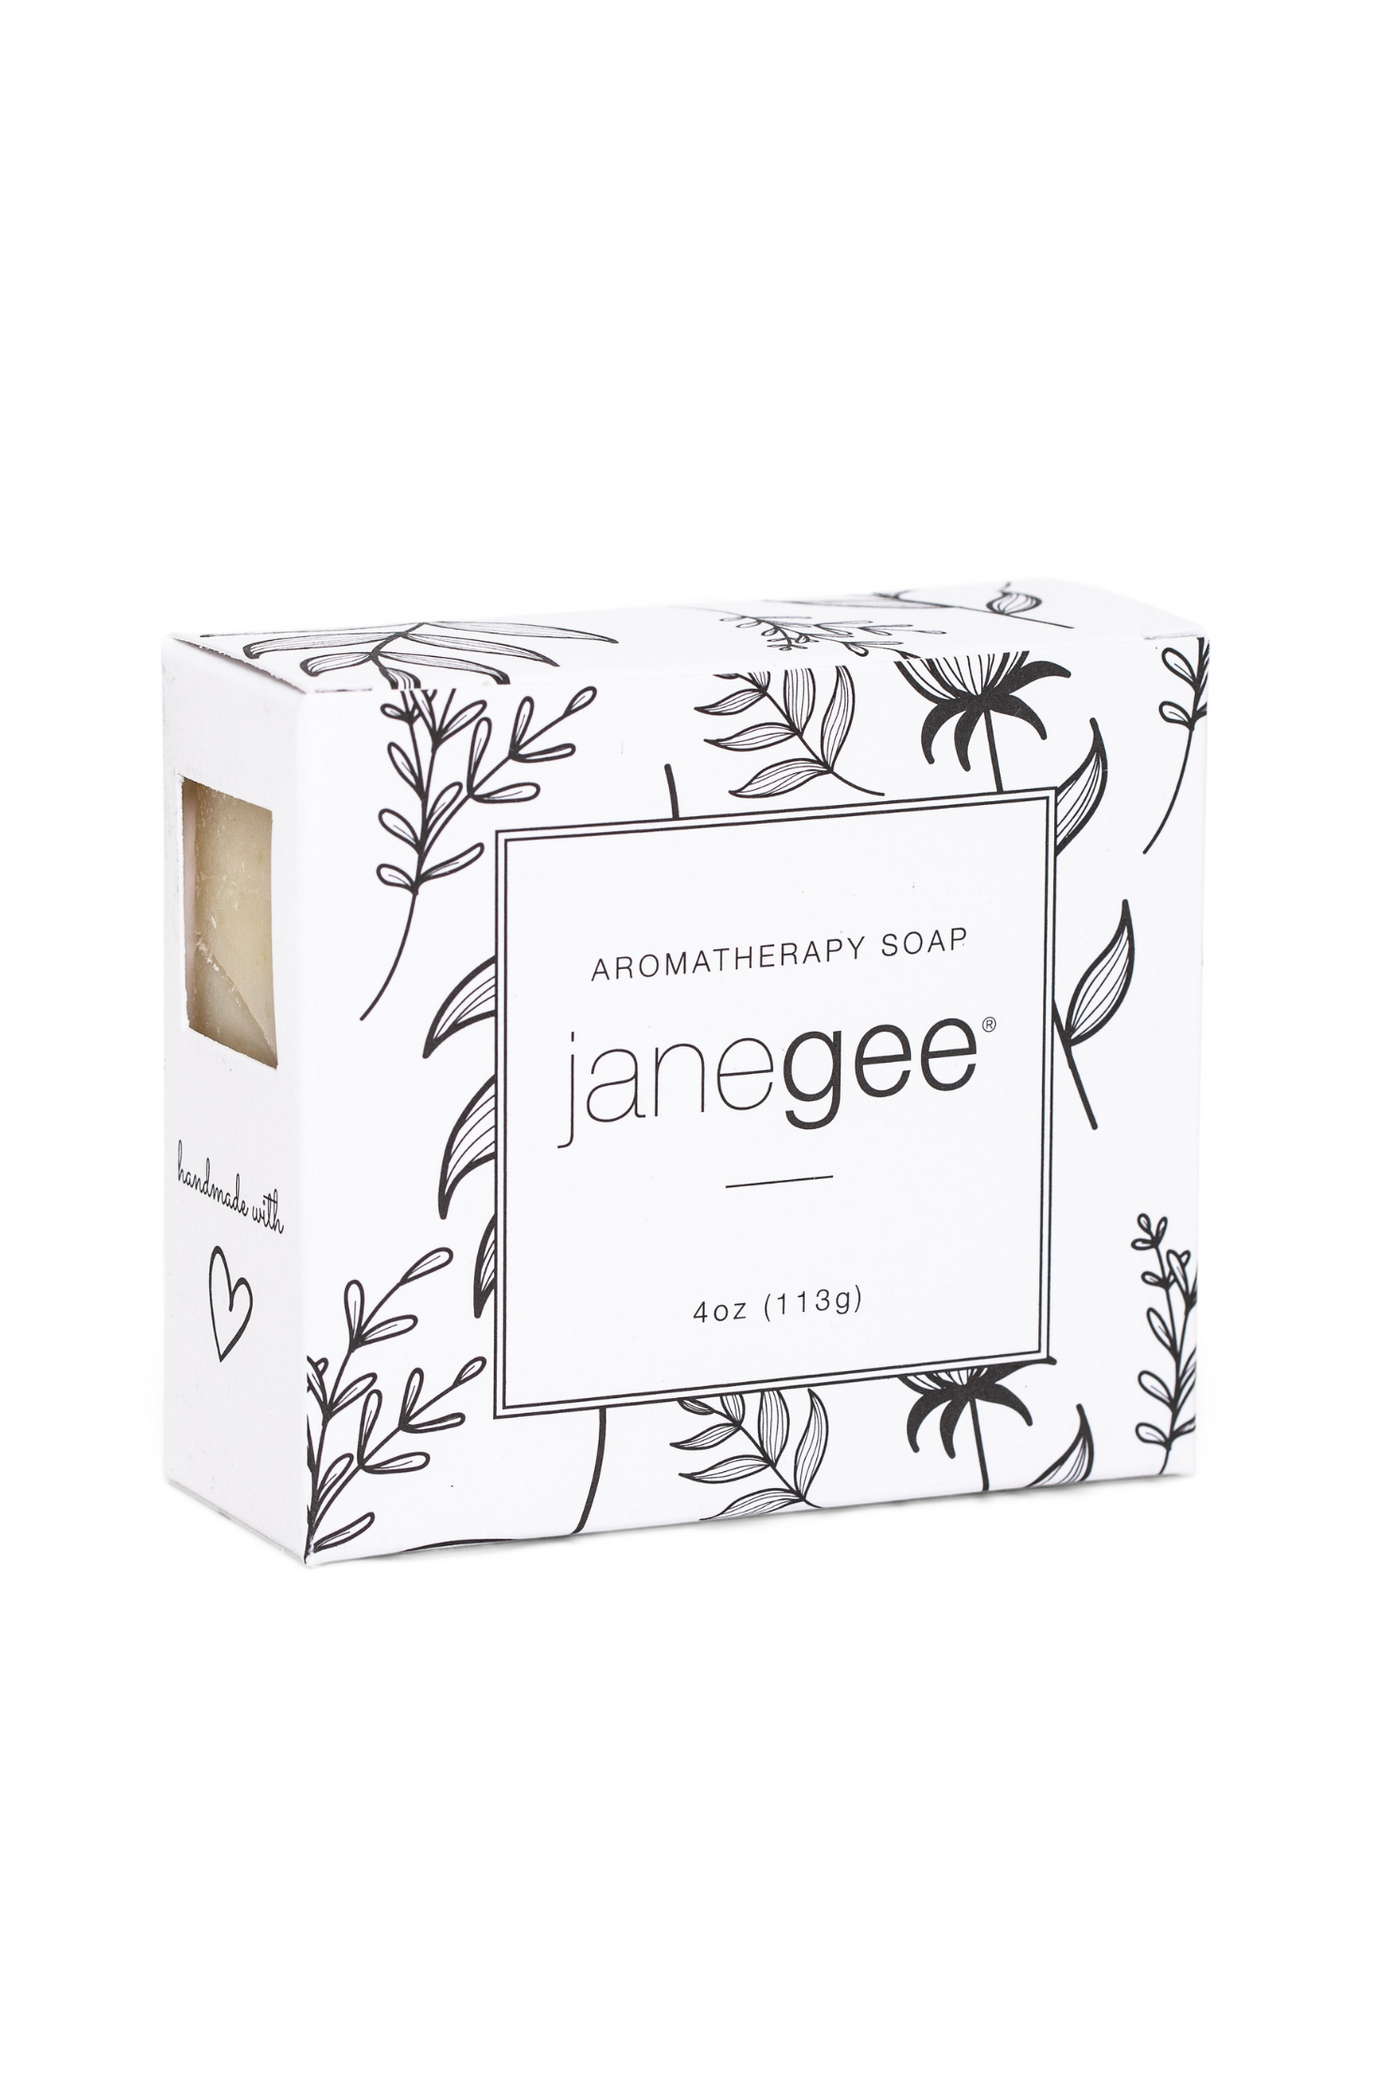 janegee Aromatherapy Soap